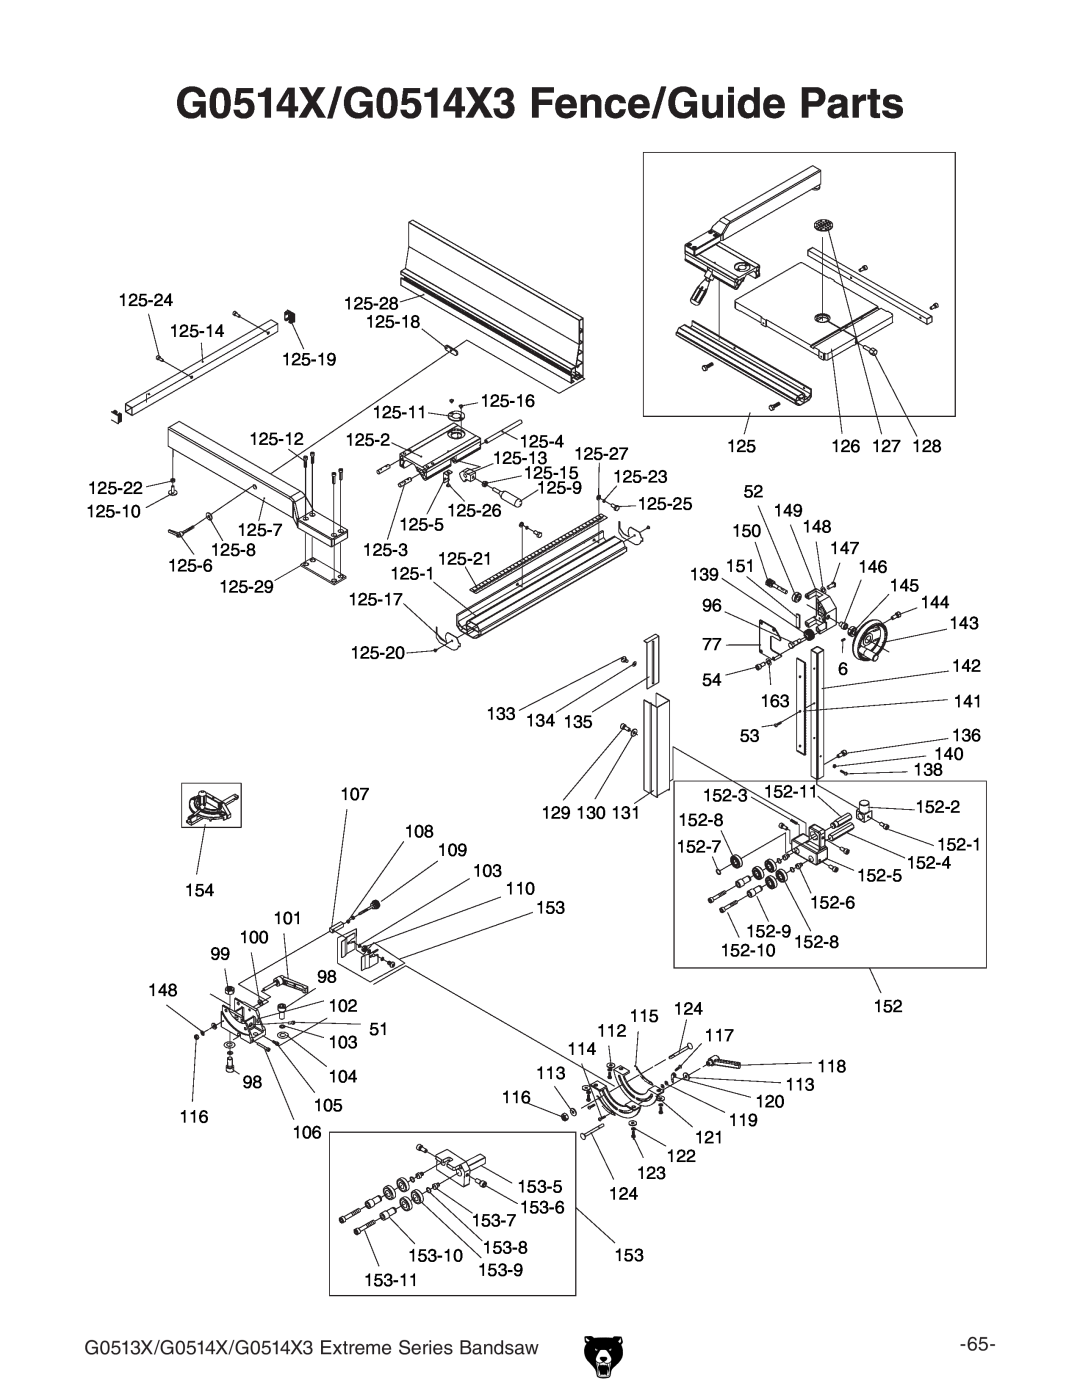 Grizzly owner manual G0514X/G0514X3 Fence/Guide Parts, G0513X/G0514X/G0514X3 Extreme Series Bandsaw 